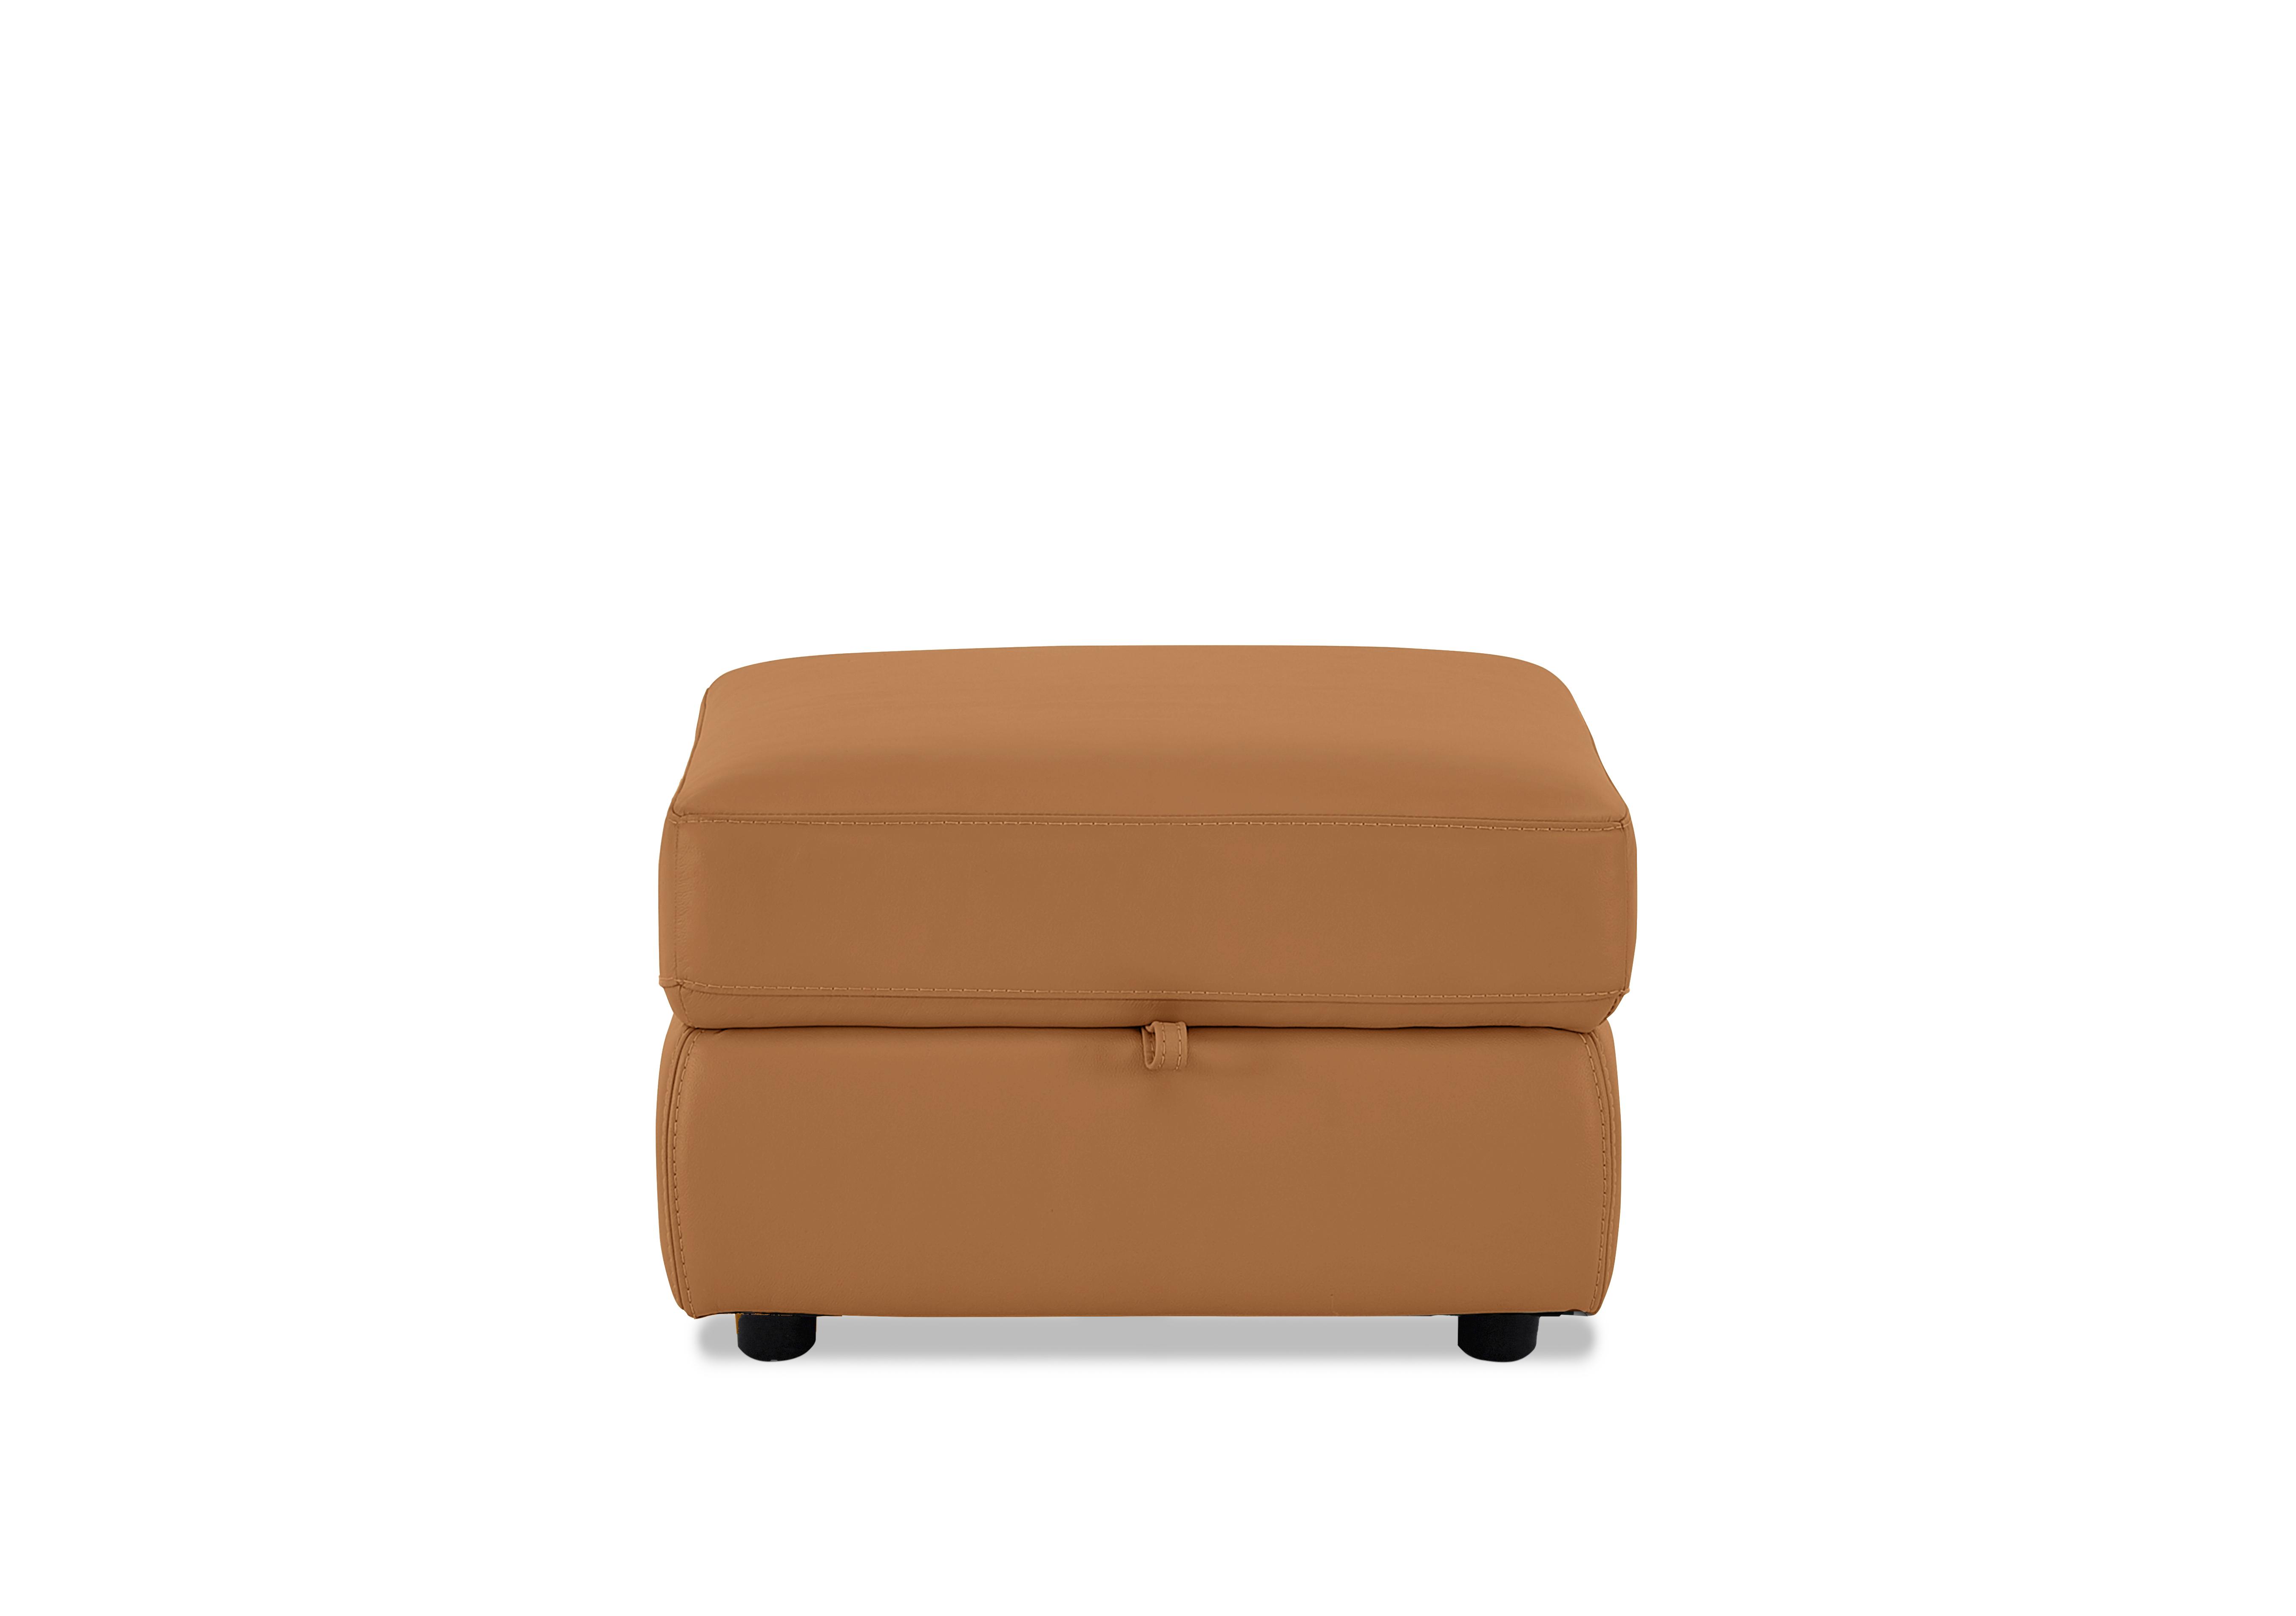 Touch Leather Storage Footstool in Bv-335e Honey Yellow on Furniture Village